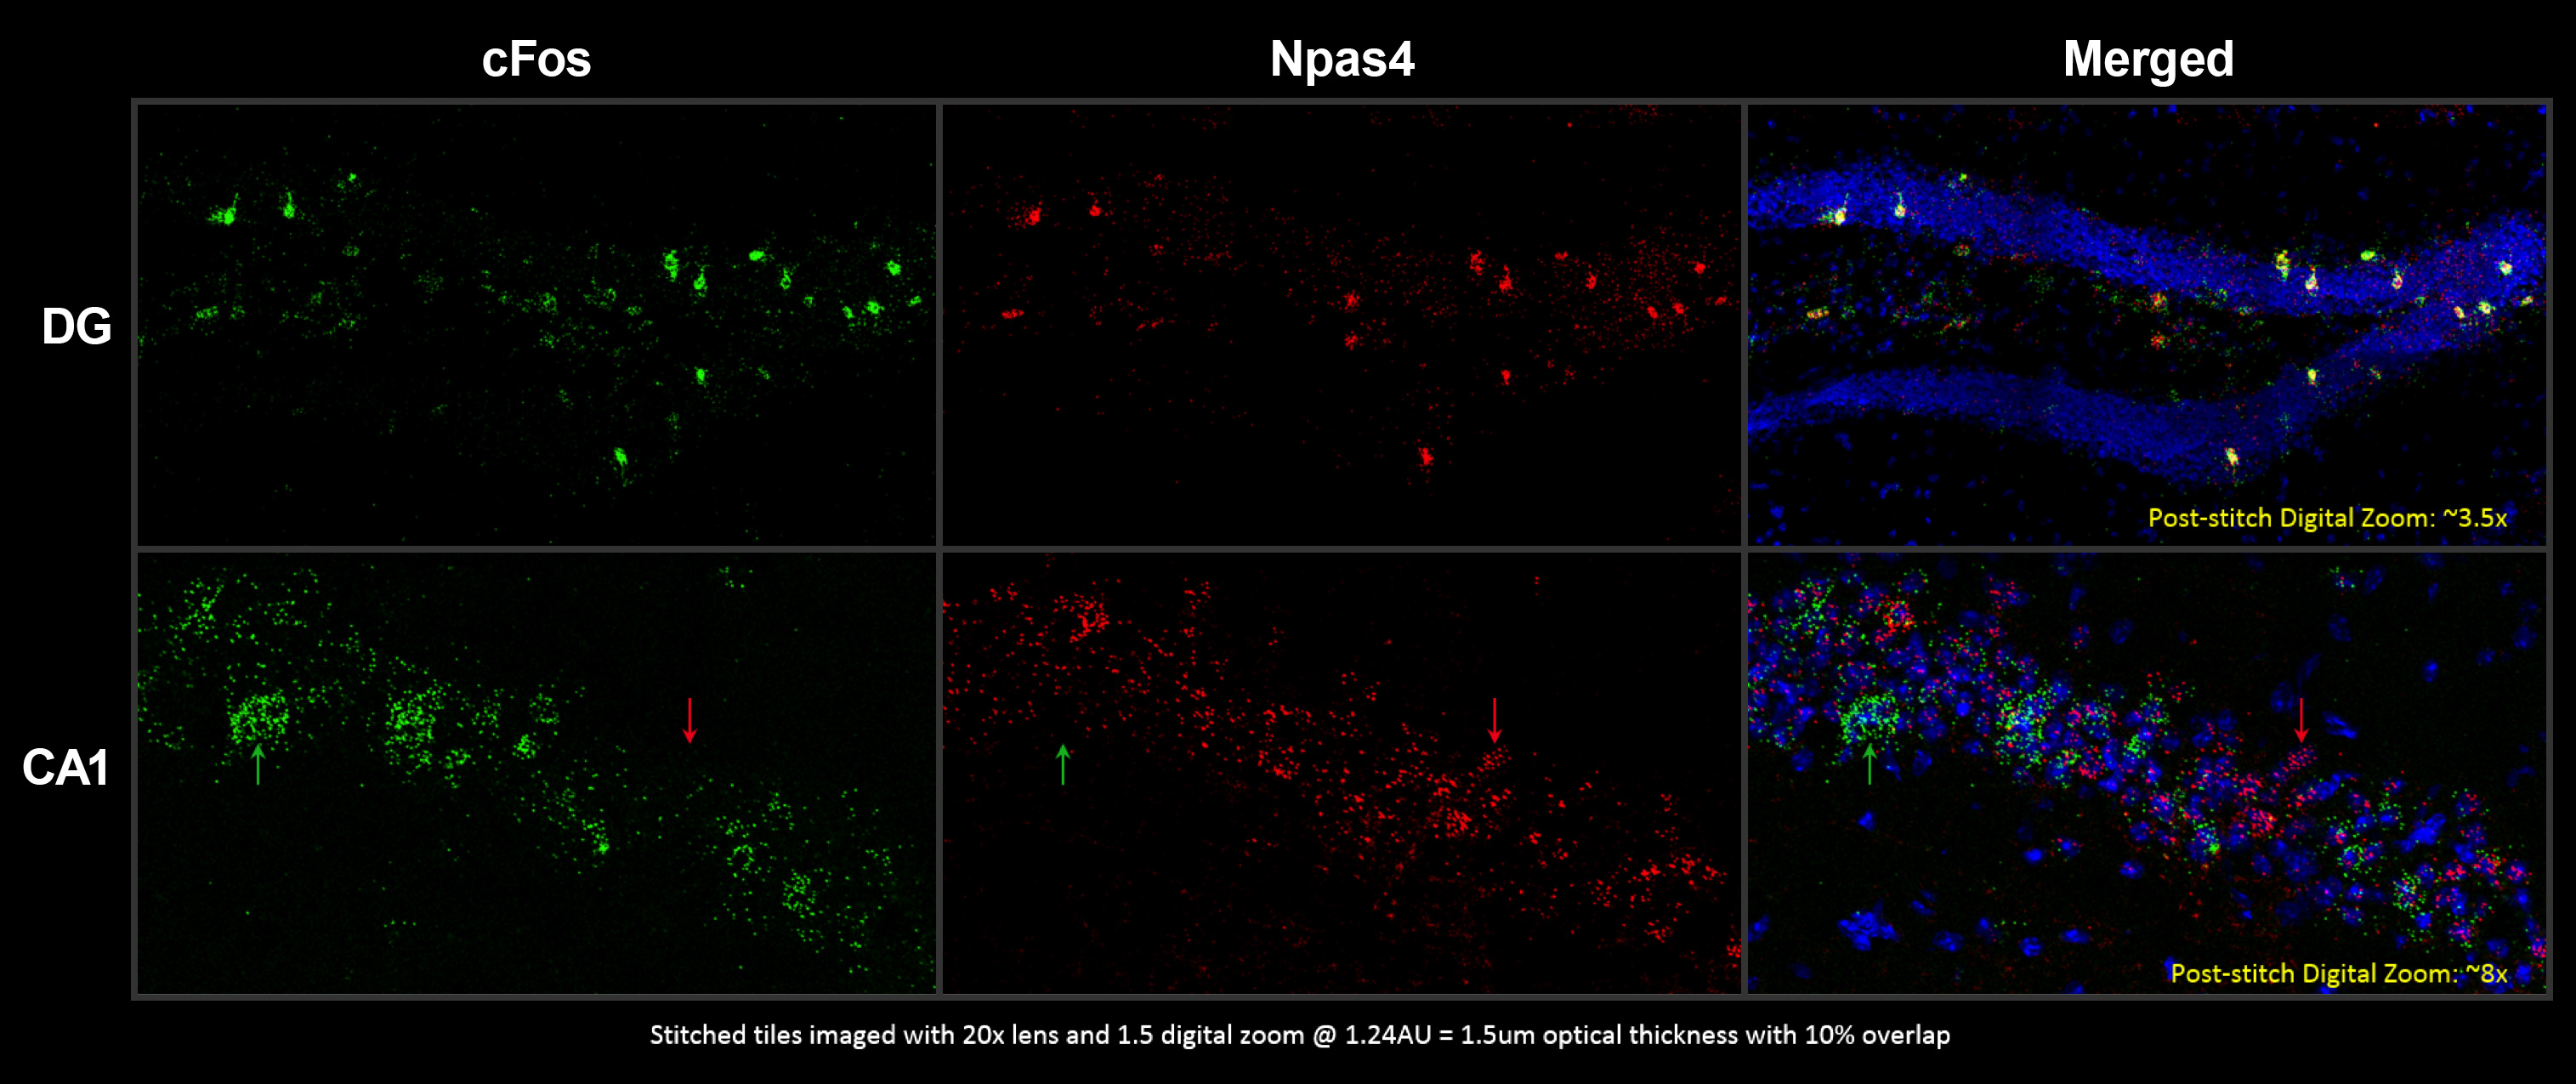 Figure 6: Behavioral training induces cfos and Npas4 in distinct sets of cells.